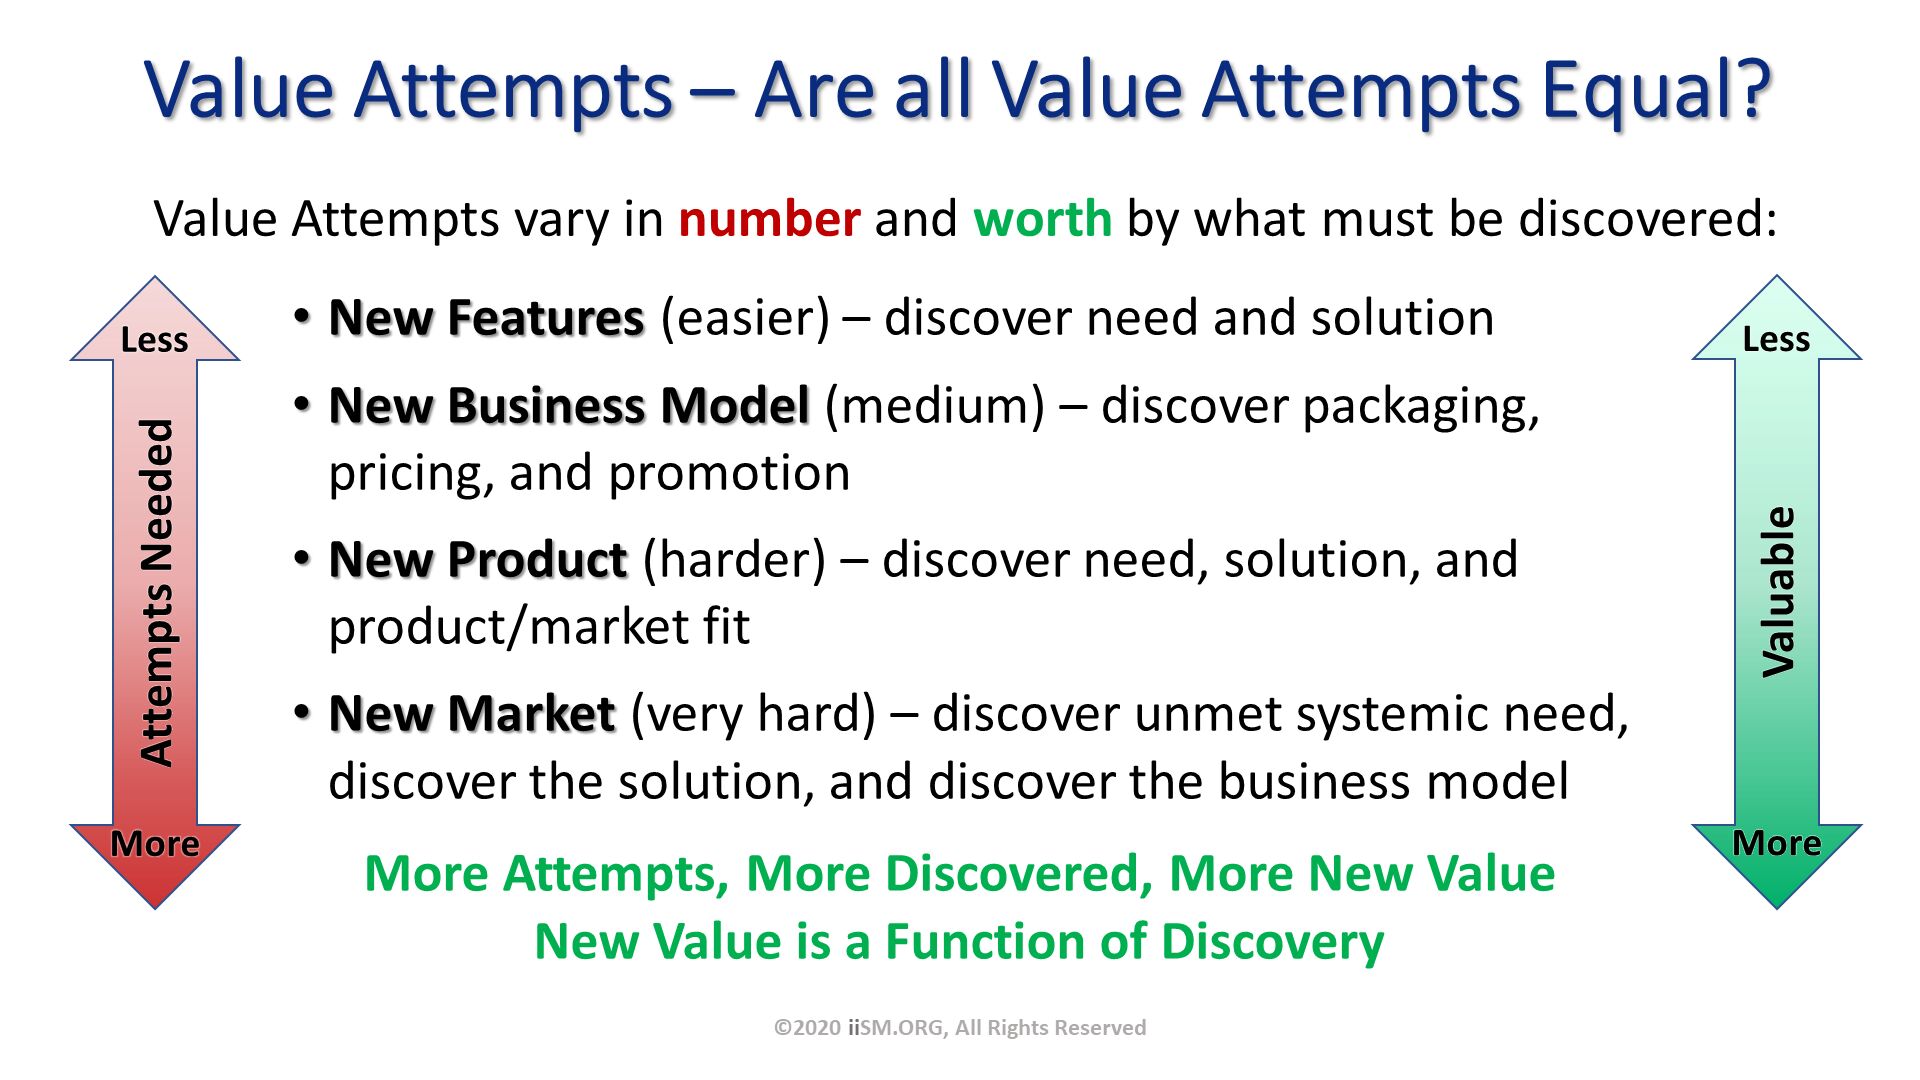 Value Attempts – Are all Value Attempts Equal?. Value Attempts vary in number and worth by what must be discovered:. ©2020 iiSM.ORG, All Rights Reserved. Attempts Needed. Less . More . New Features (easier) – discover need and solution
New Business Model (medium) – discover packaging, pricing, and promotion
New Product (harder) – discover need, solution, and product/market fit
New Market (very hard) – discover unmet systemic need,discover the solution, and discover the business model 


. More Attempts, More Discovered, More New Value
New Value is a Function of Discovery. 